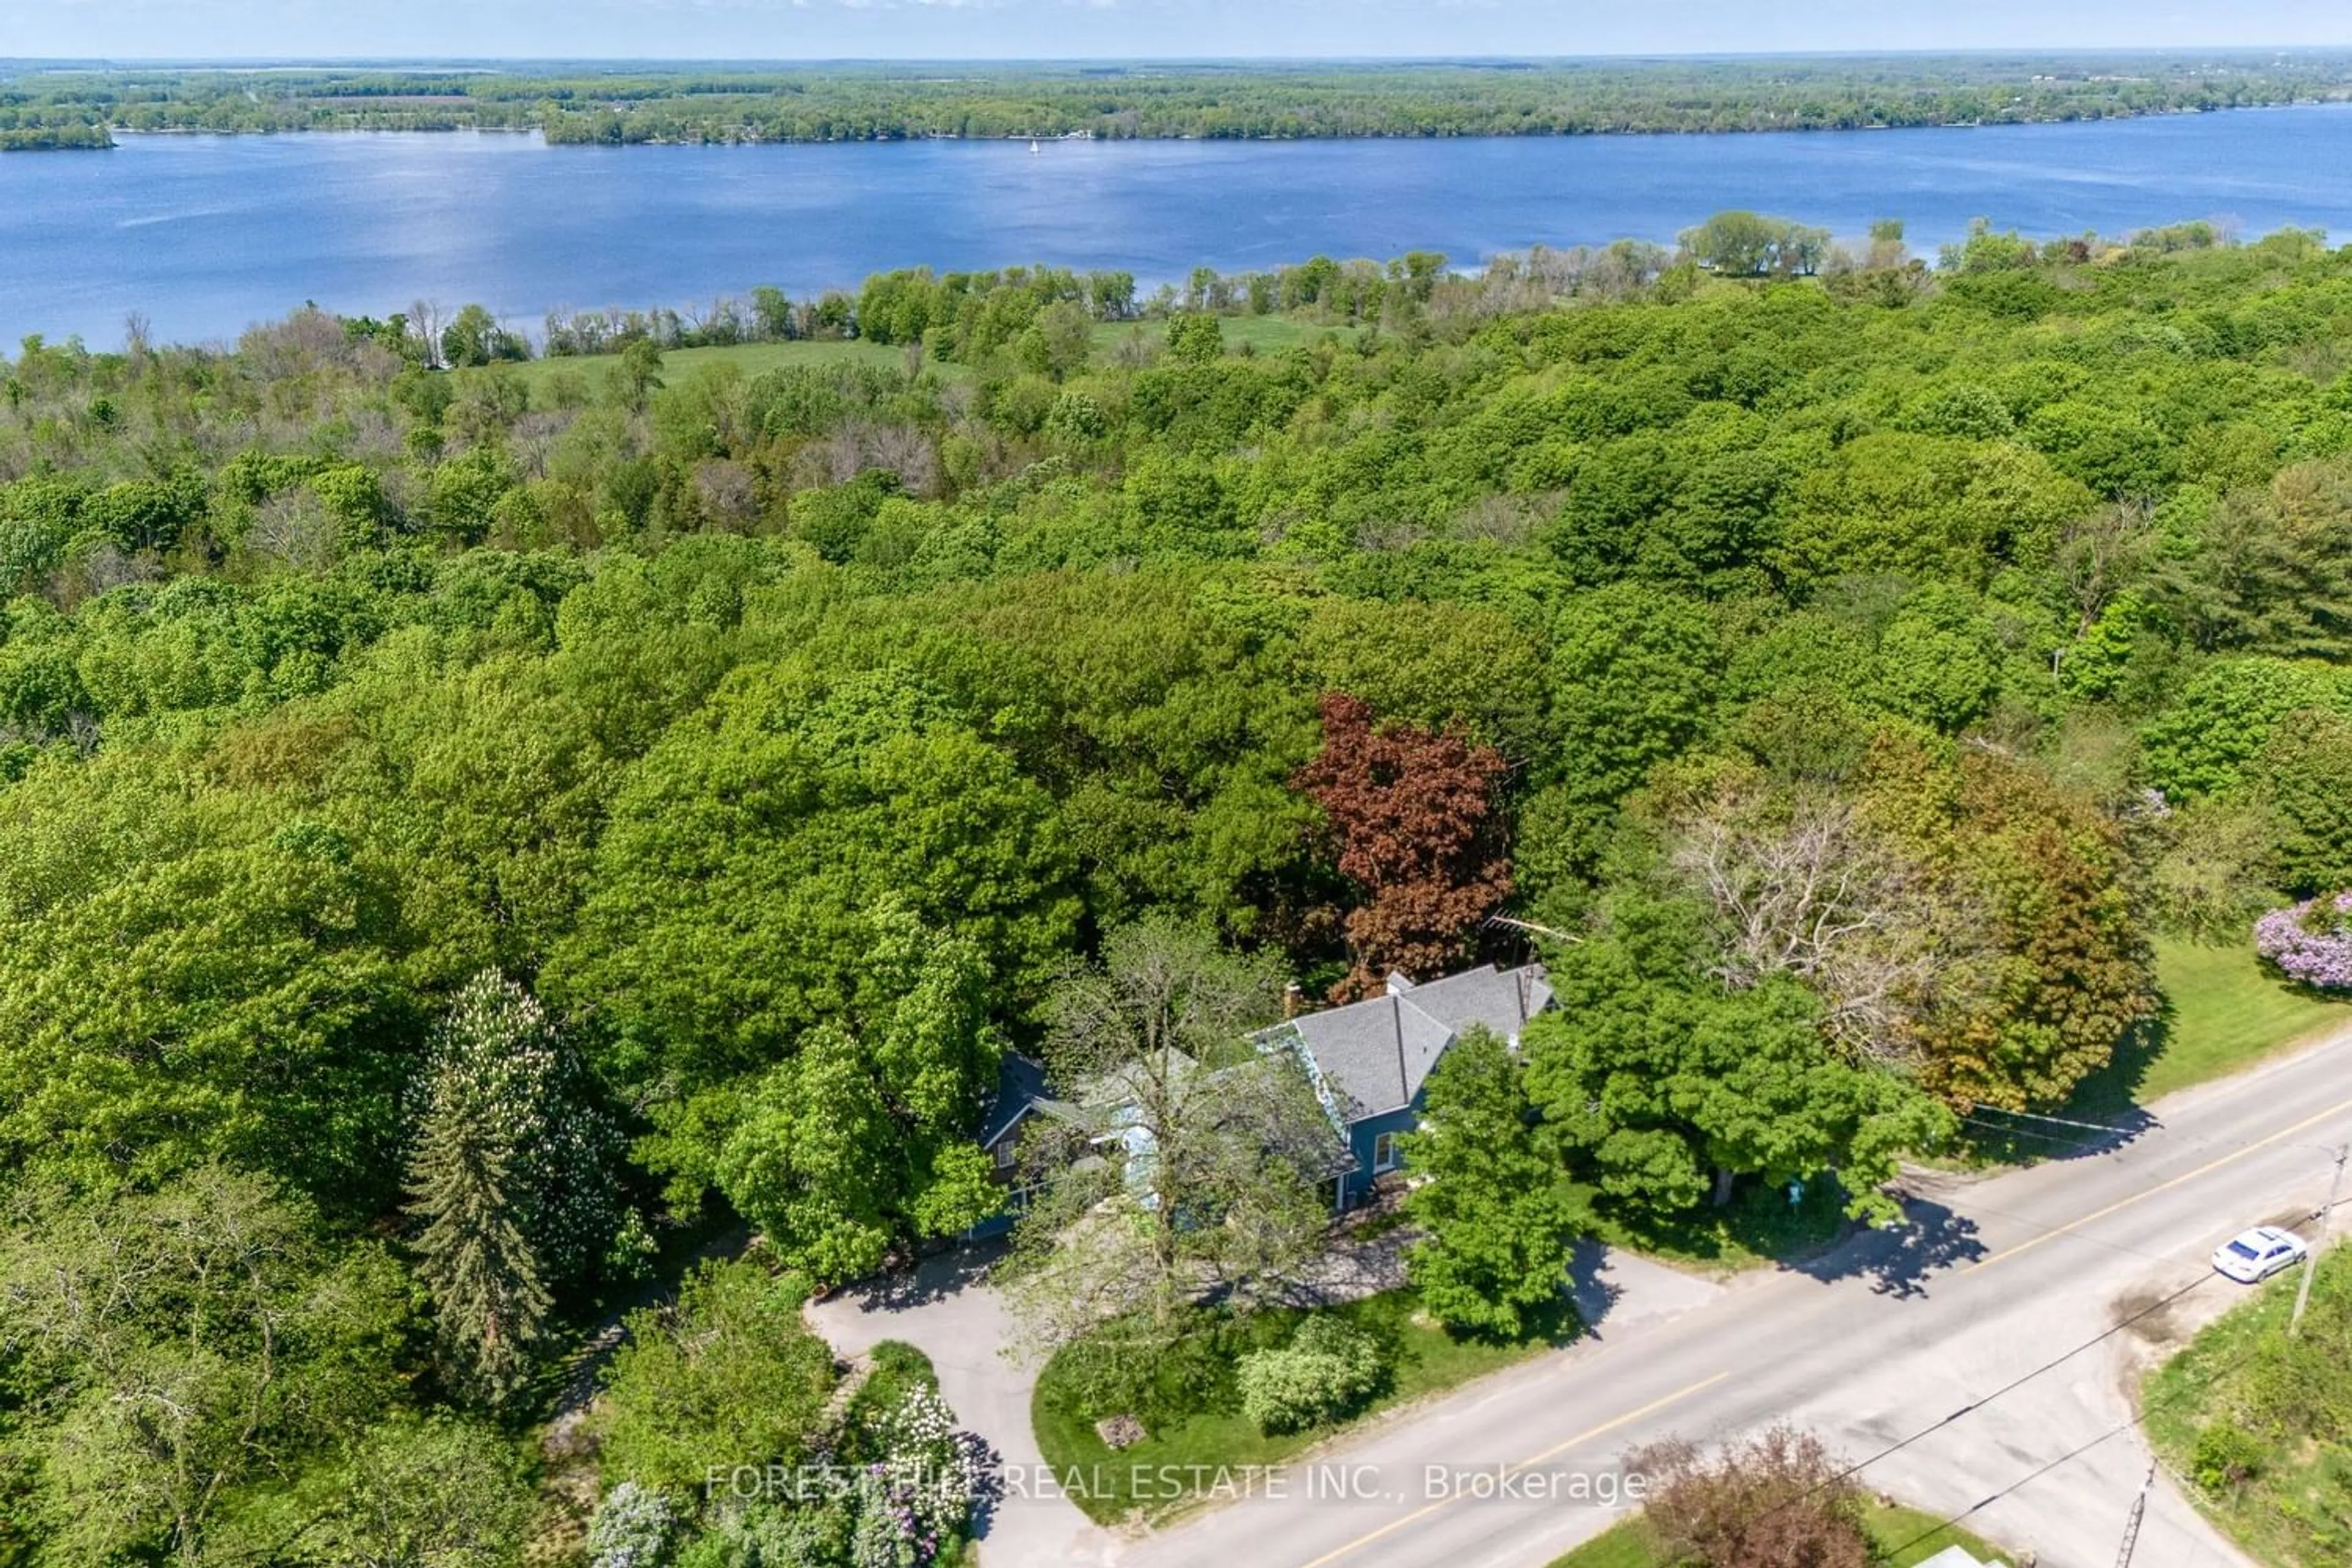 Lakeview for 1649 County Road 7, Prince Edward County Ontario K0K 2T0